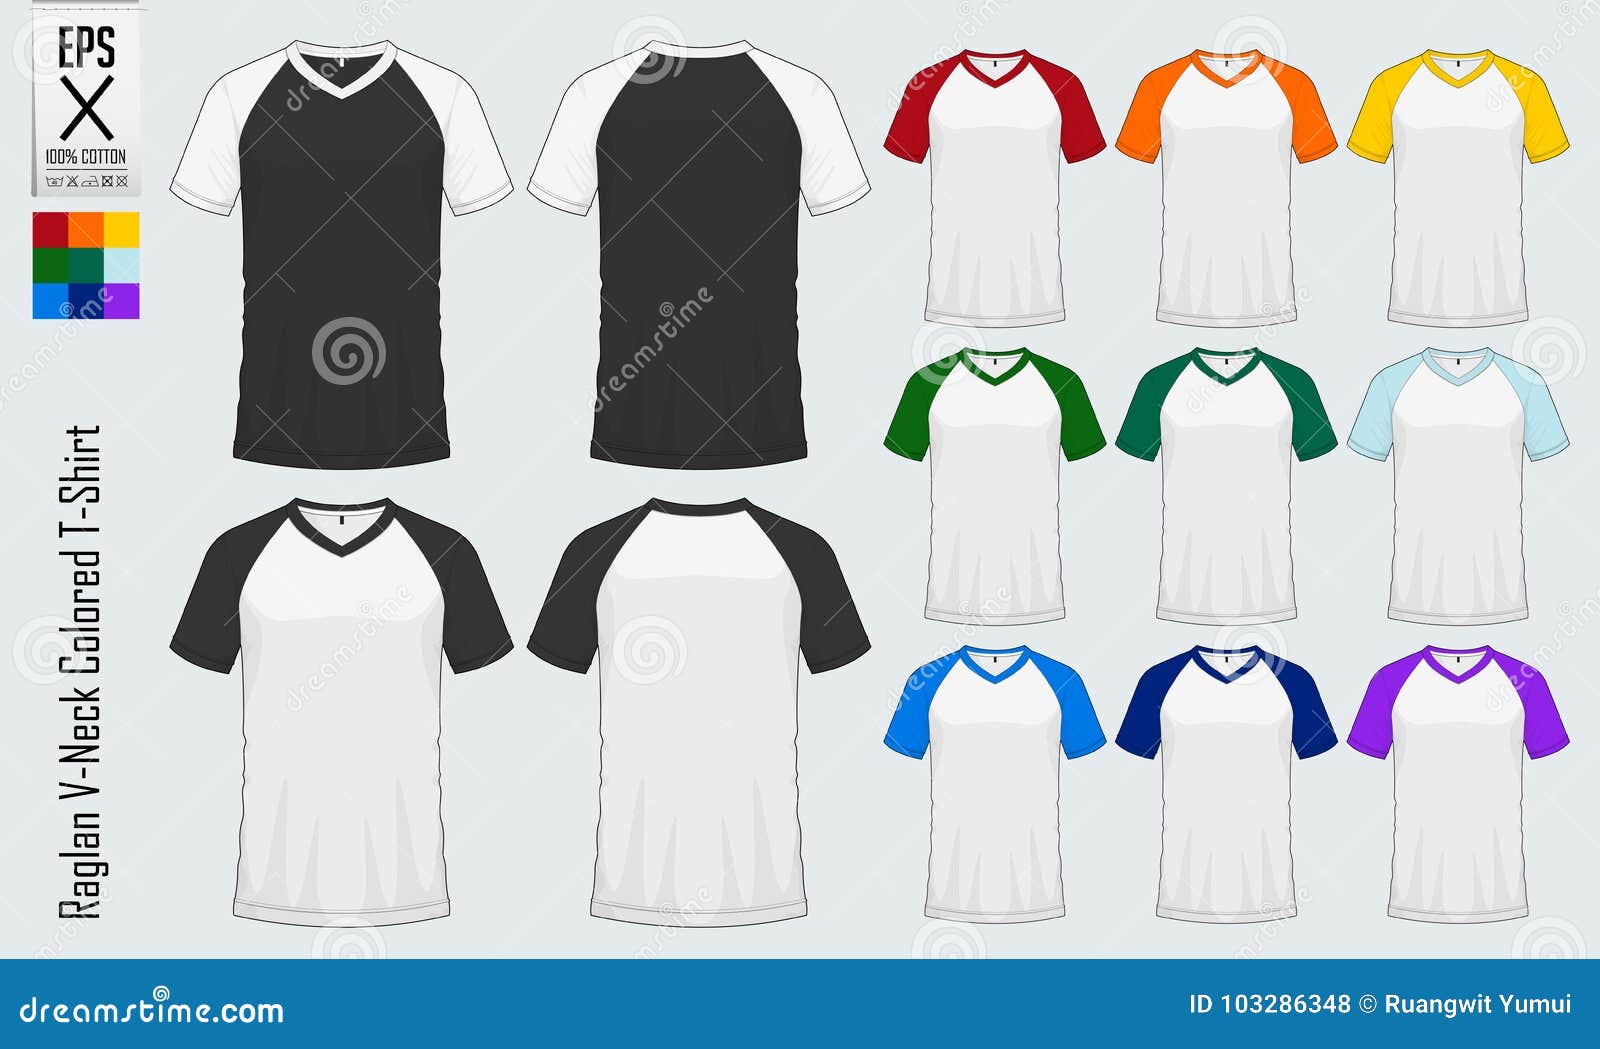 Download Raglan V Neck T Shirts Templates Colored Sleeve Jersey Mockup In Front View And Back View For Baseball Soccer Football Stock Vector Illustration Of Collection Mockup 103286348 Free Mockups